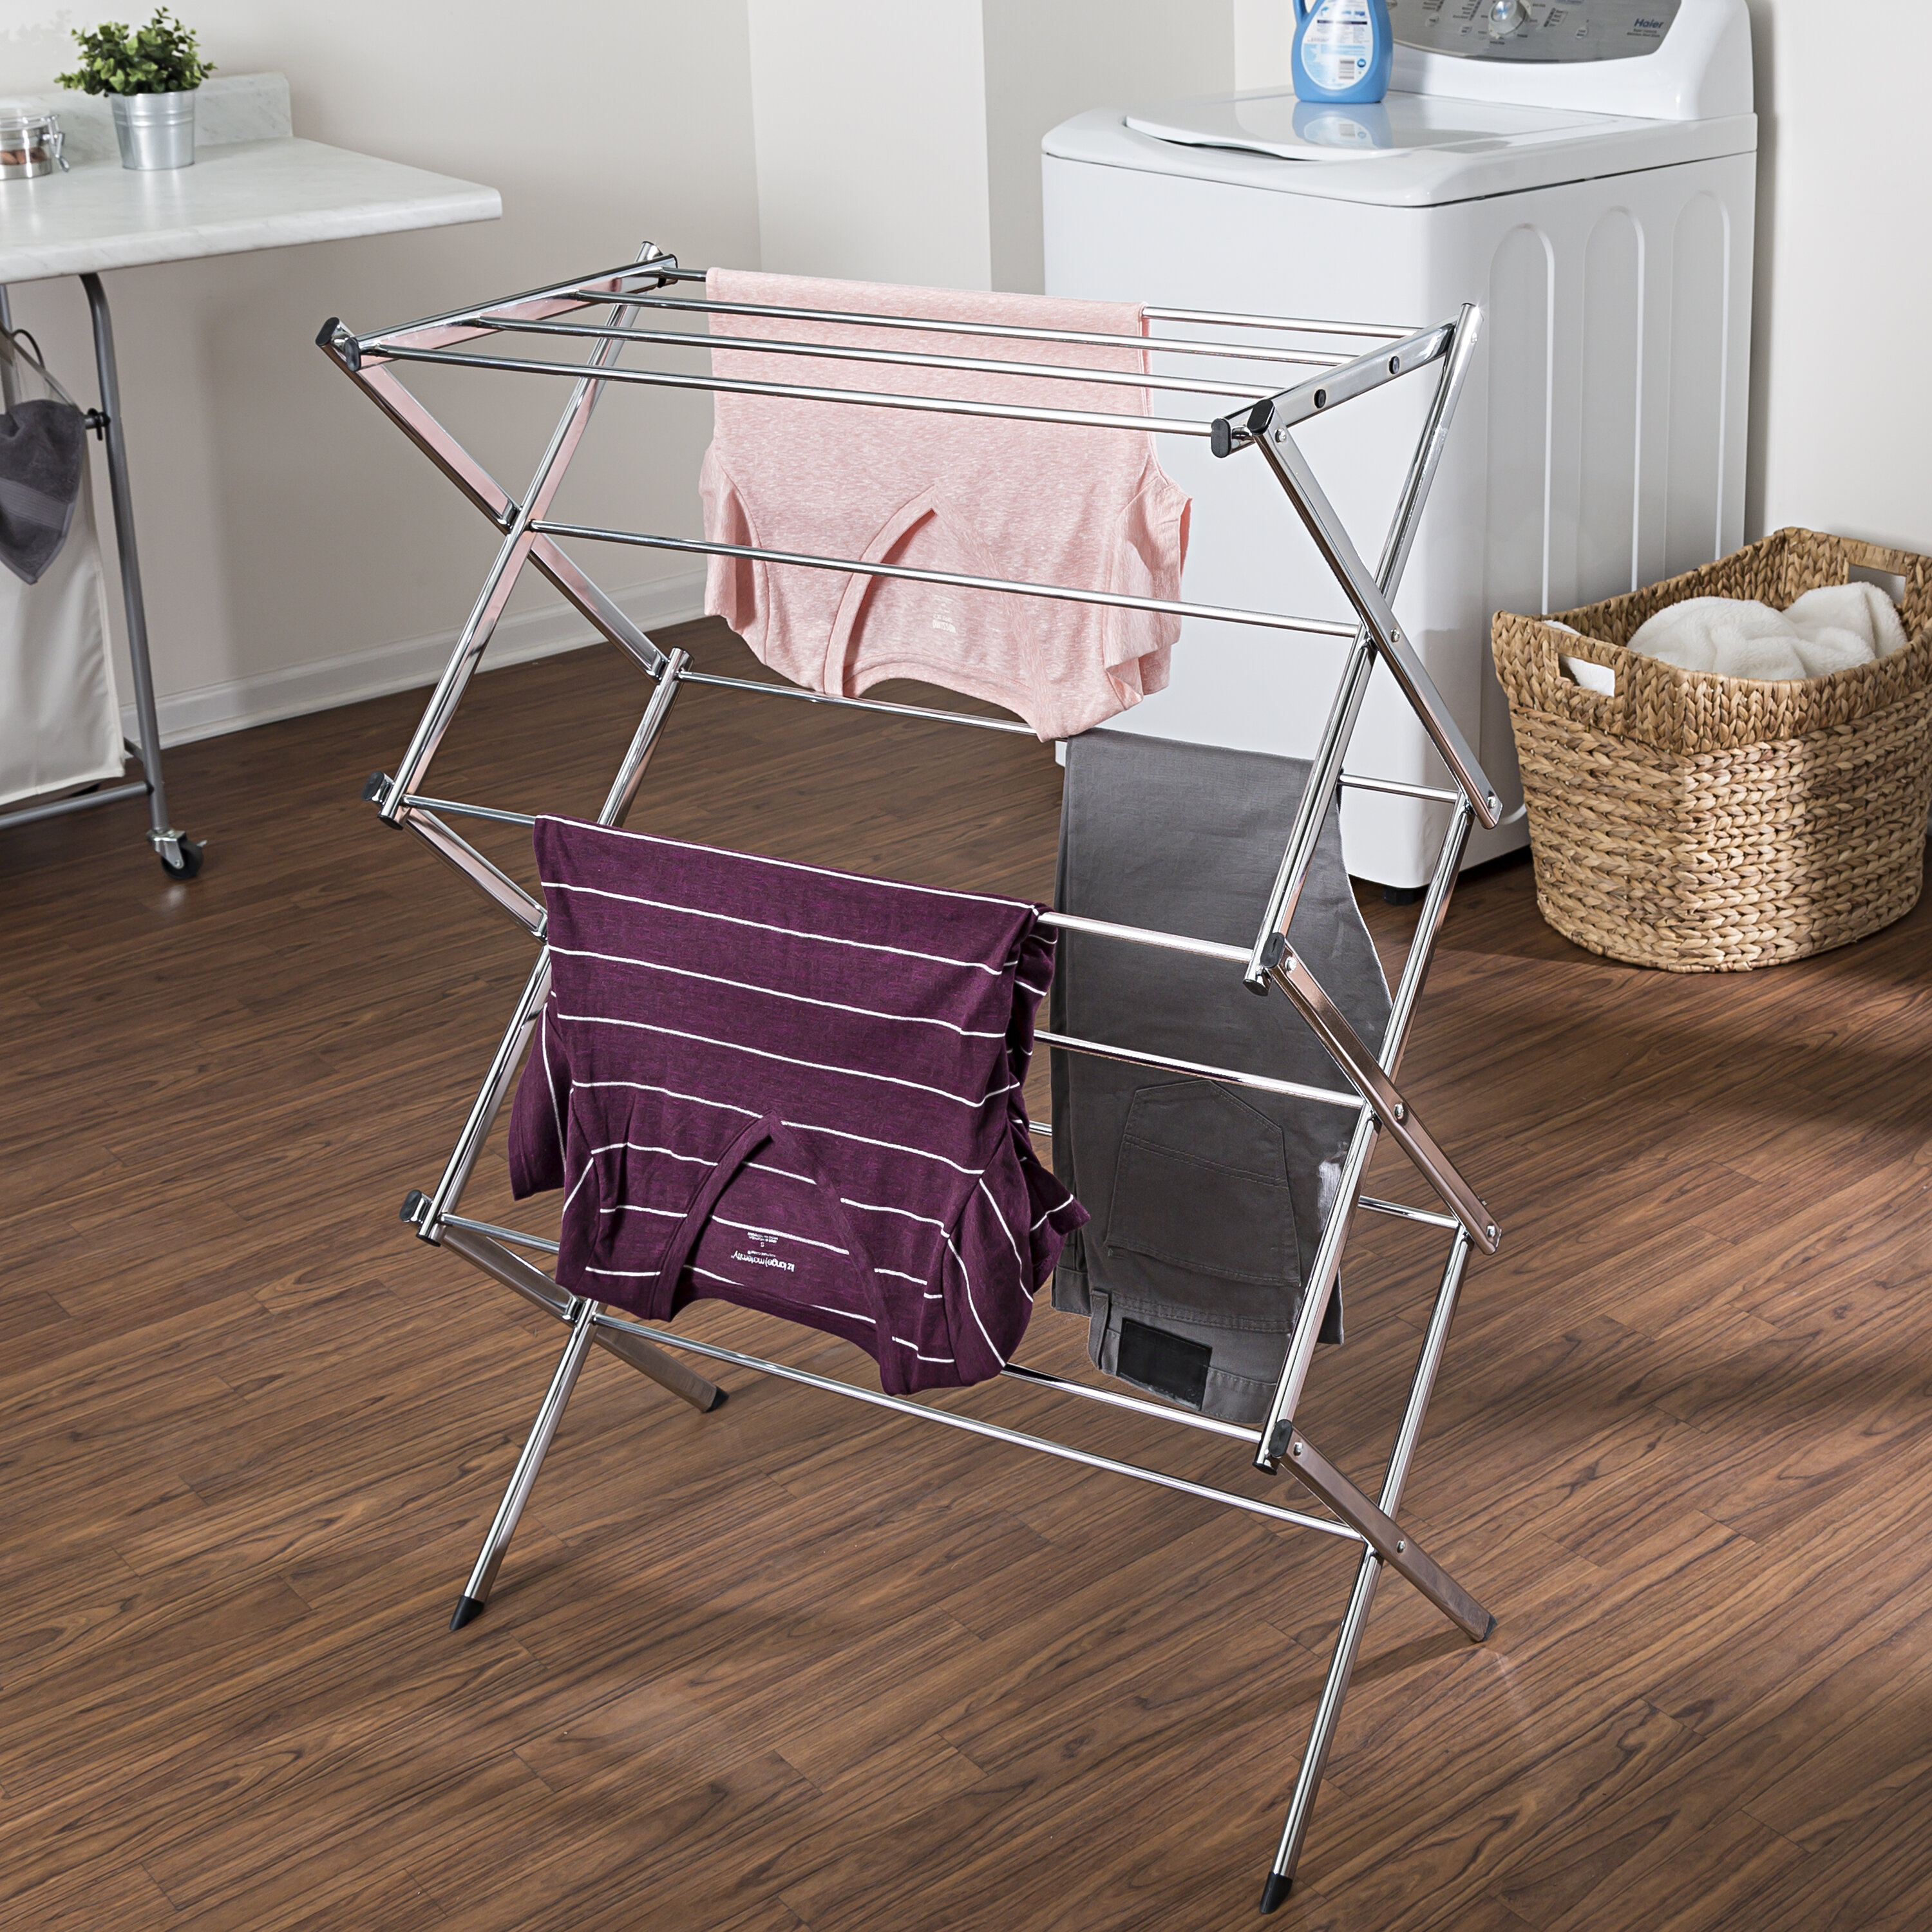 Wall Mounted Drying Rack Clothing for Laundry Foldable, Clothes Drying Rack  Folding Indoor, Laundry Drying Rack with 7 Rods, Accordion Retractable for